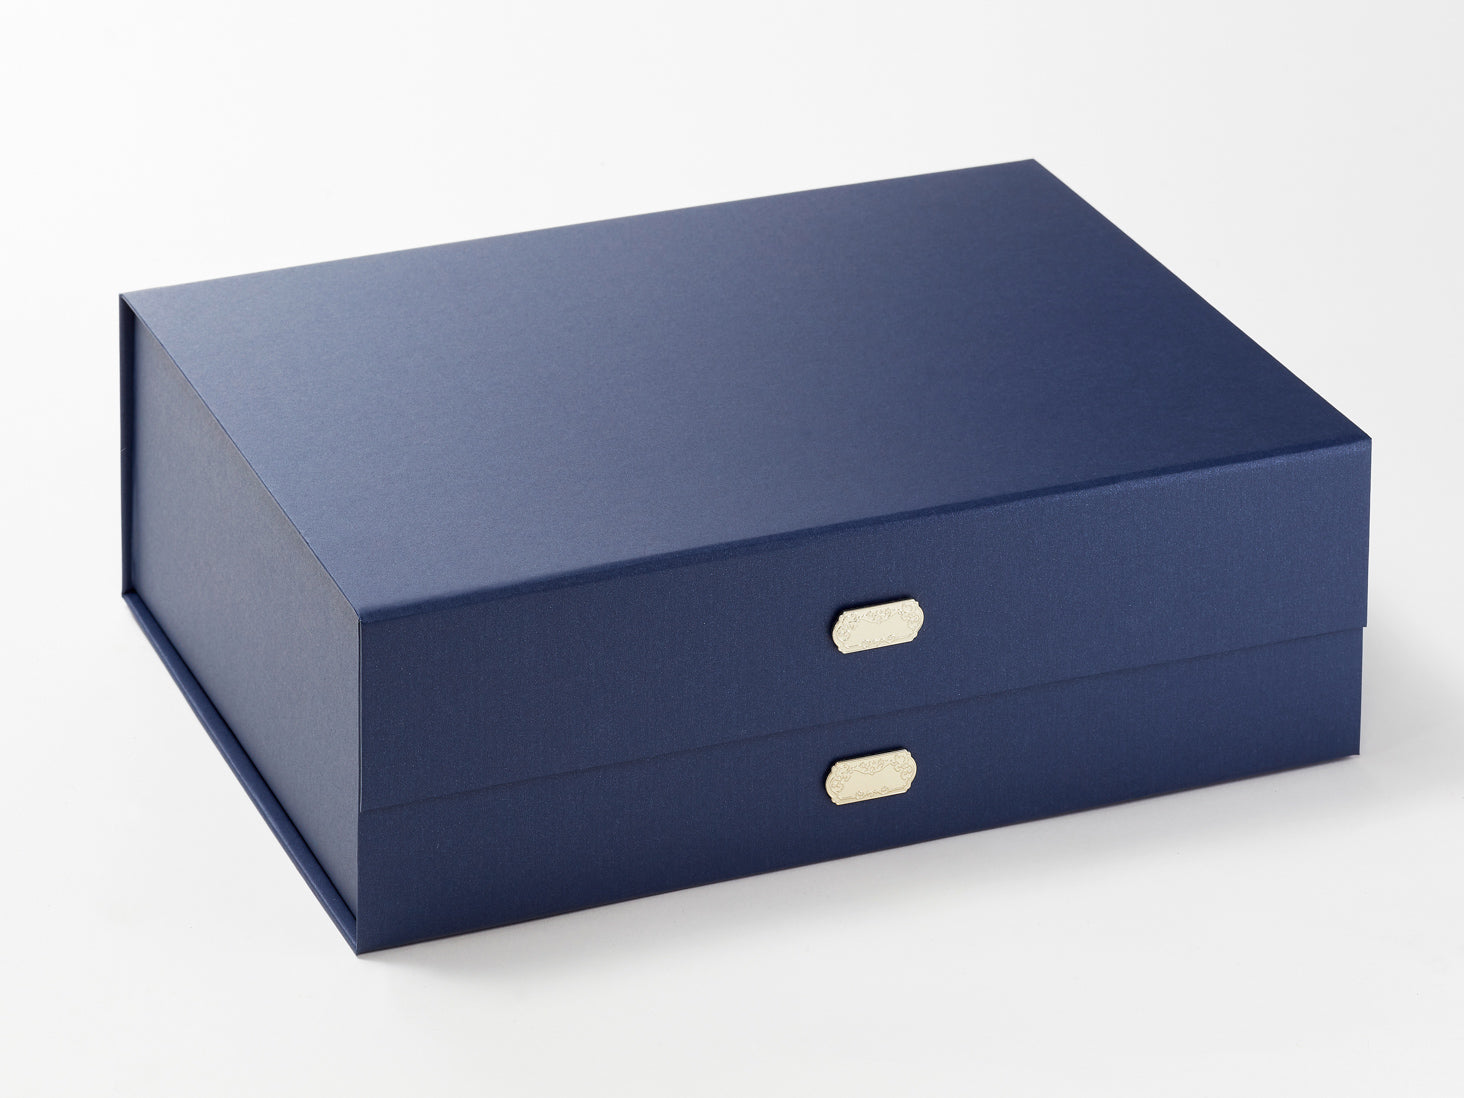 Personalise your packaging with newly launched slot decals from Foldabox